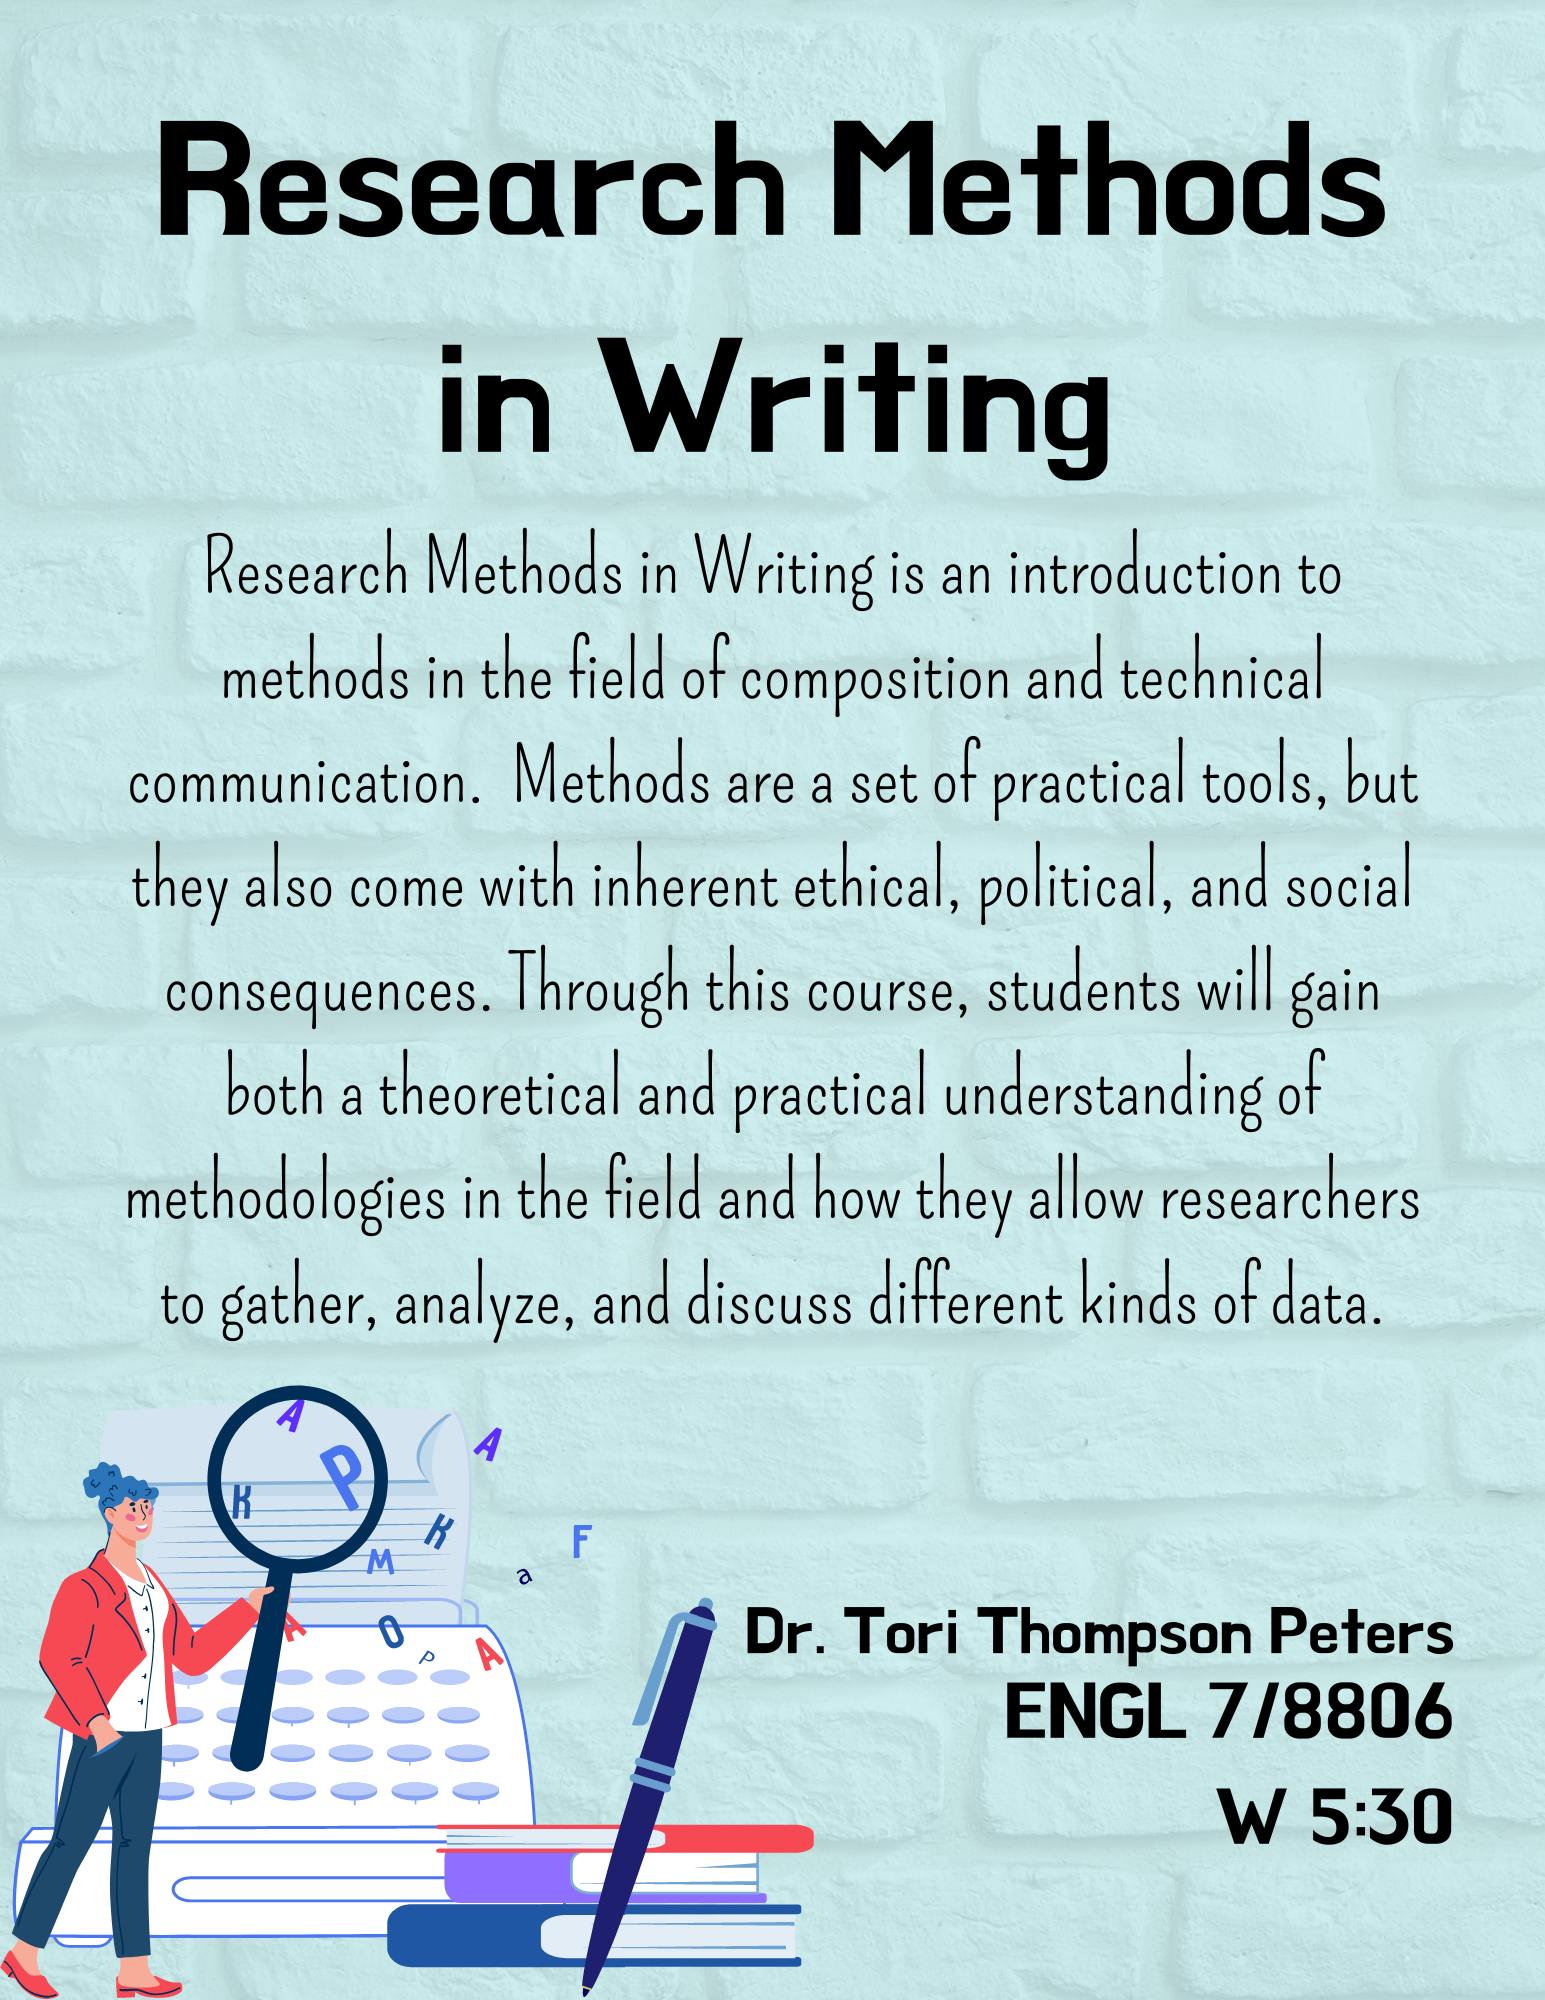 Research Methods in Writing